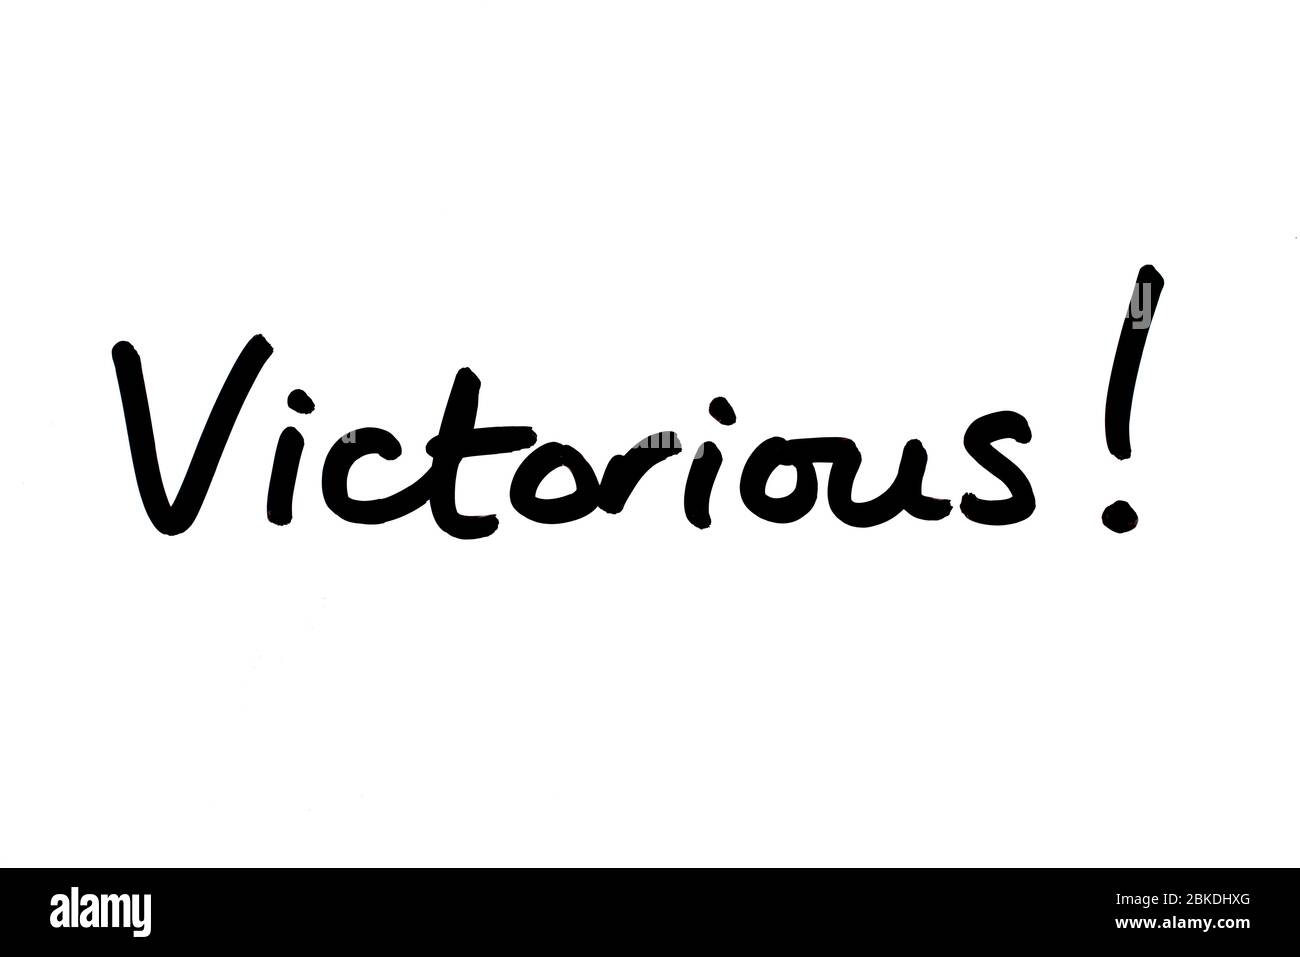 Victorious! handwritten on a white background. Stock Photo